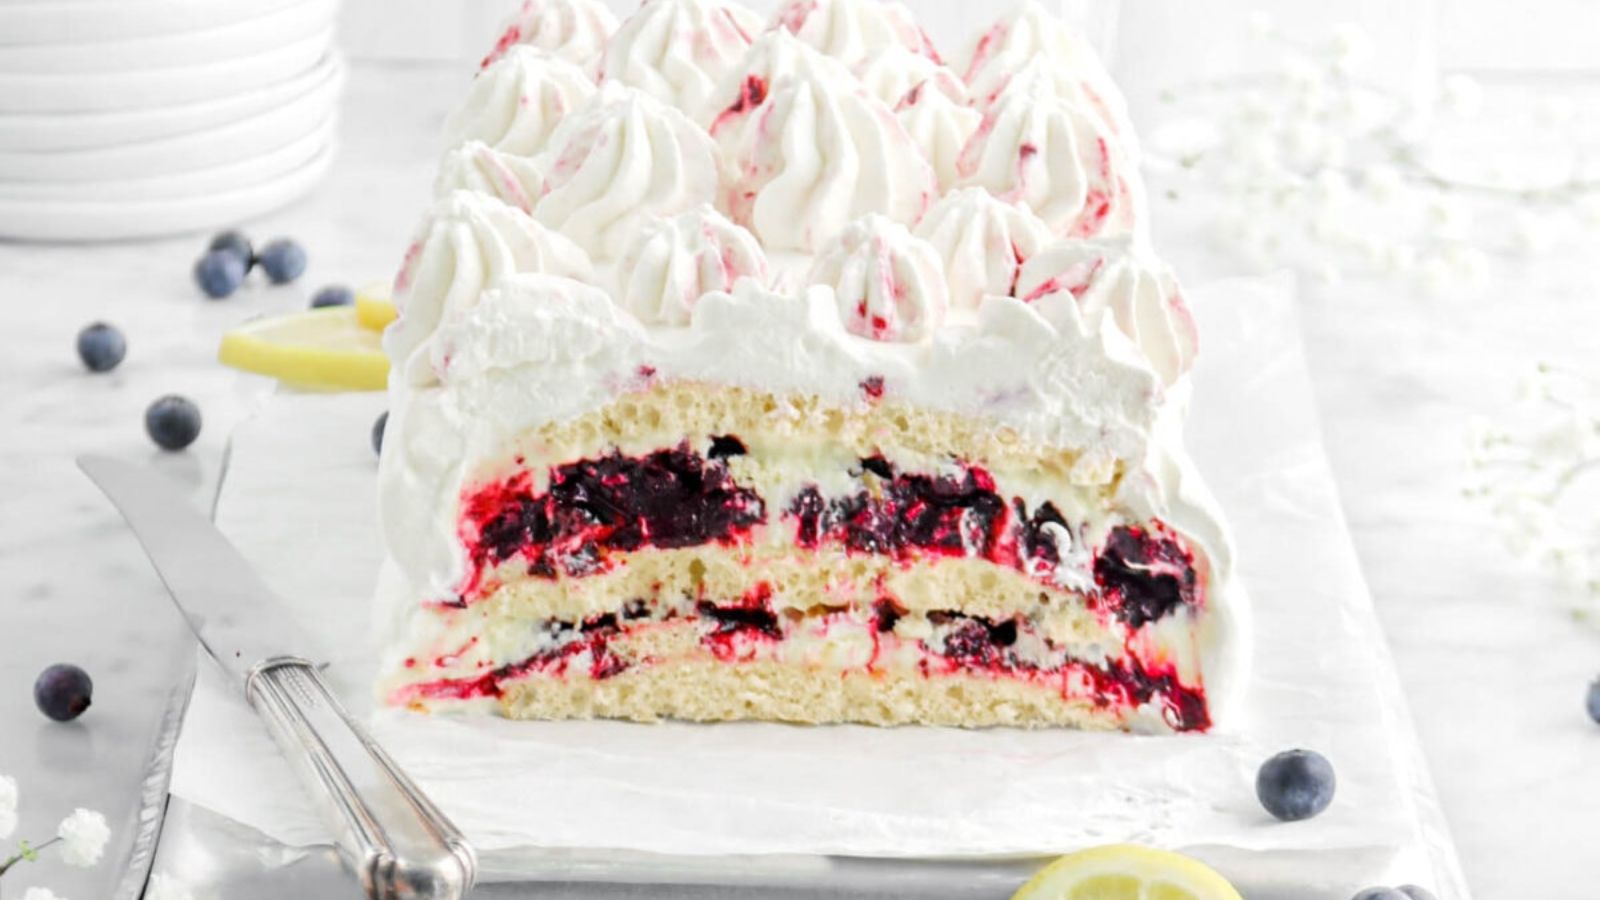 An icebox cake with lemon and blueberry filling.